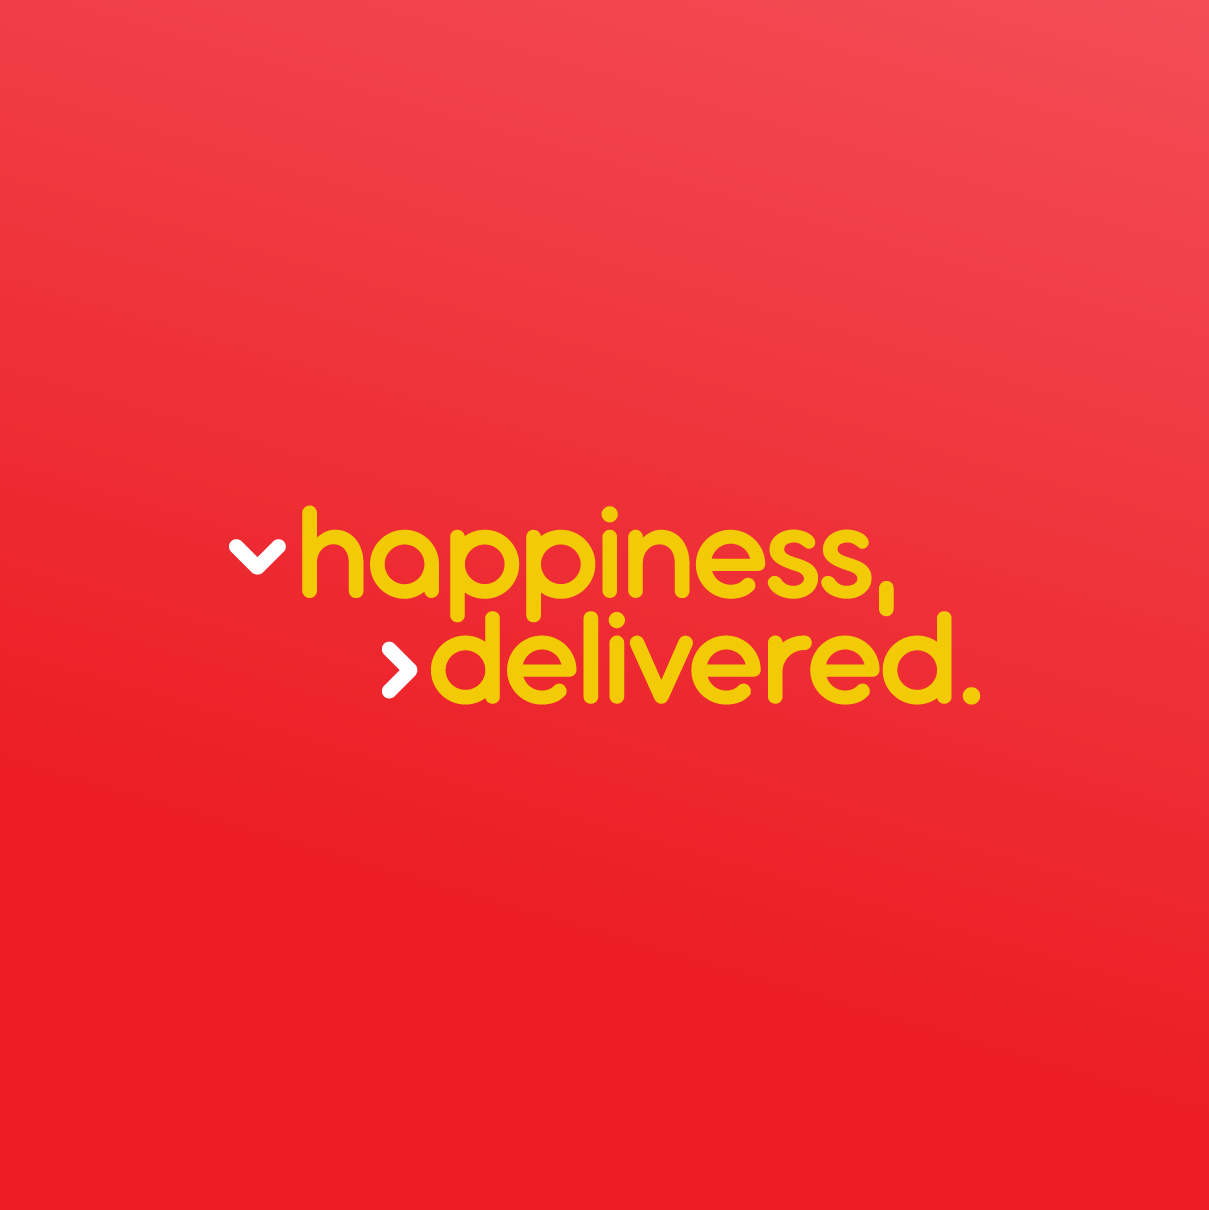 Words Happiness delivered on a red background.